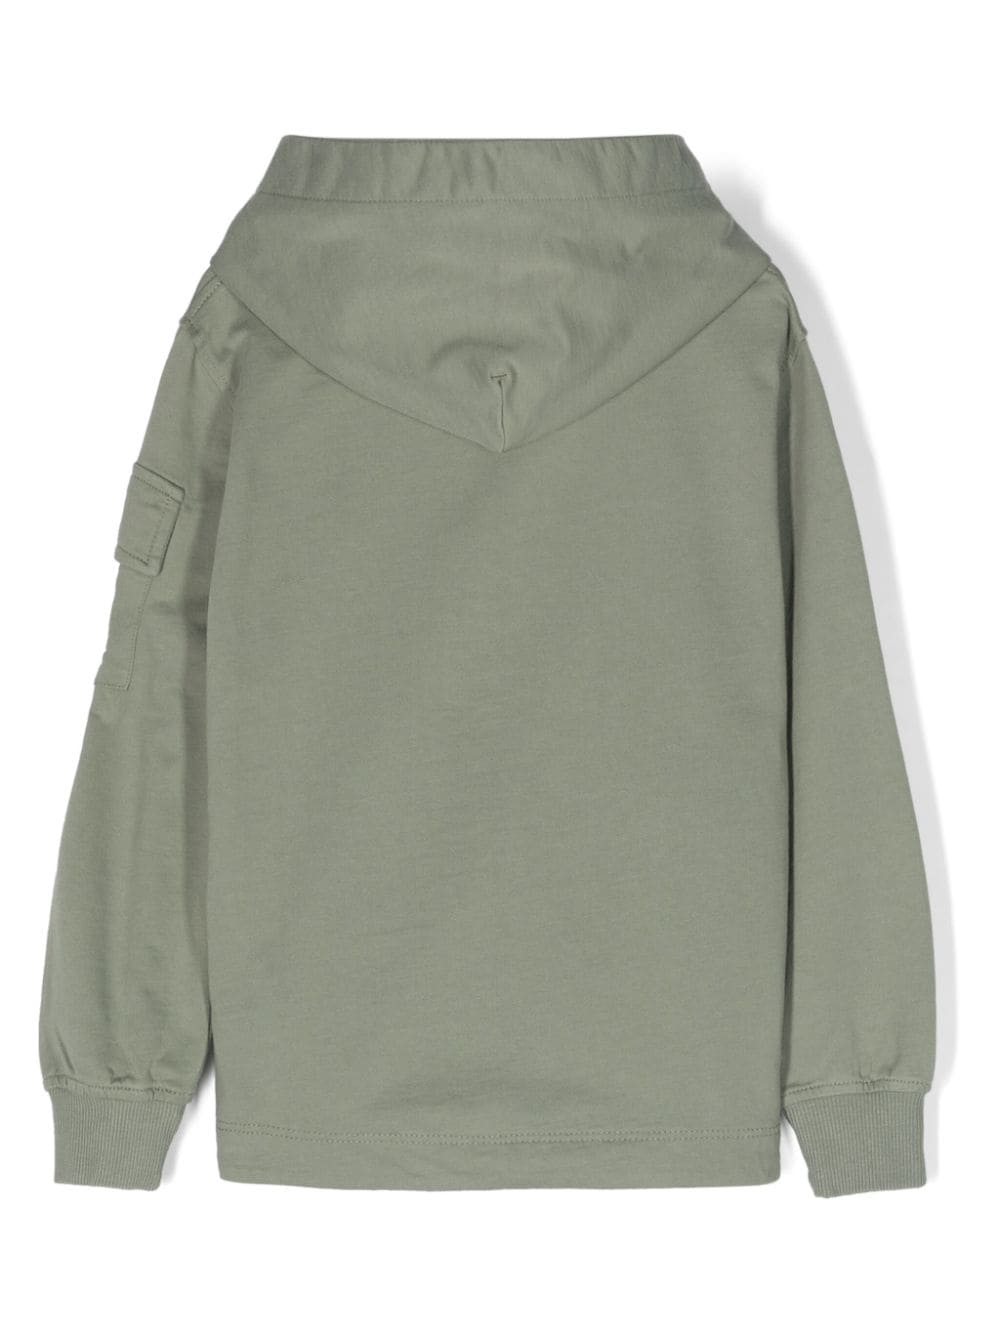 Olive green sweatshirt for boys with logo